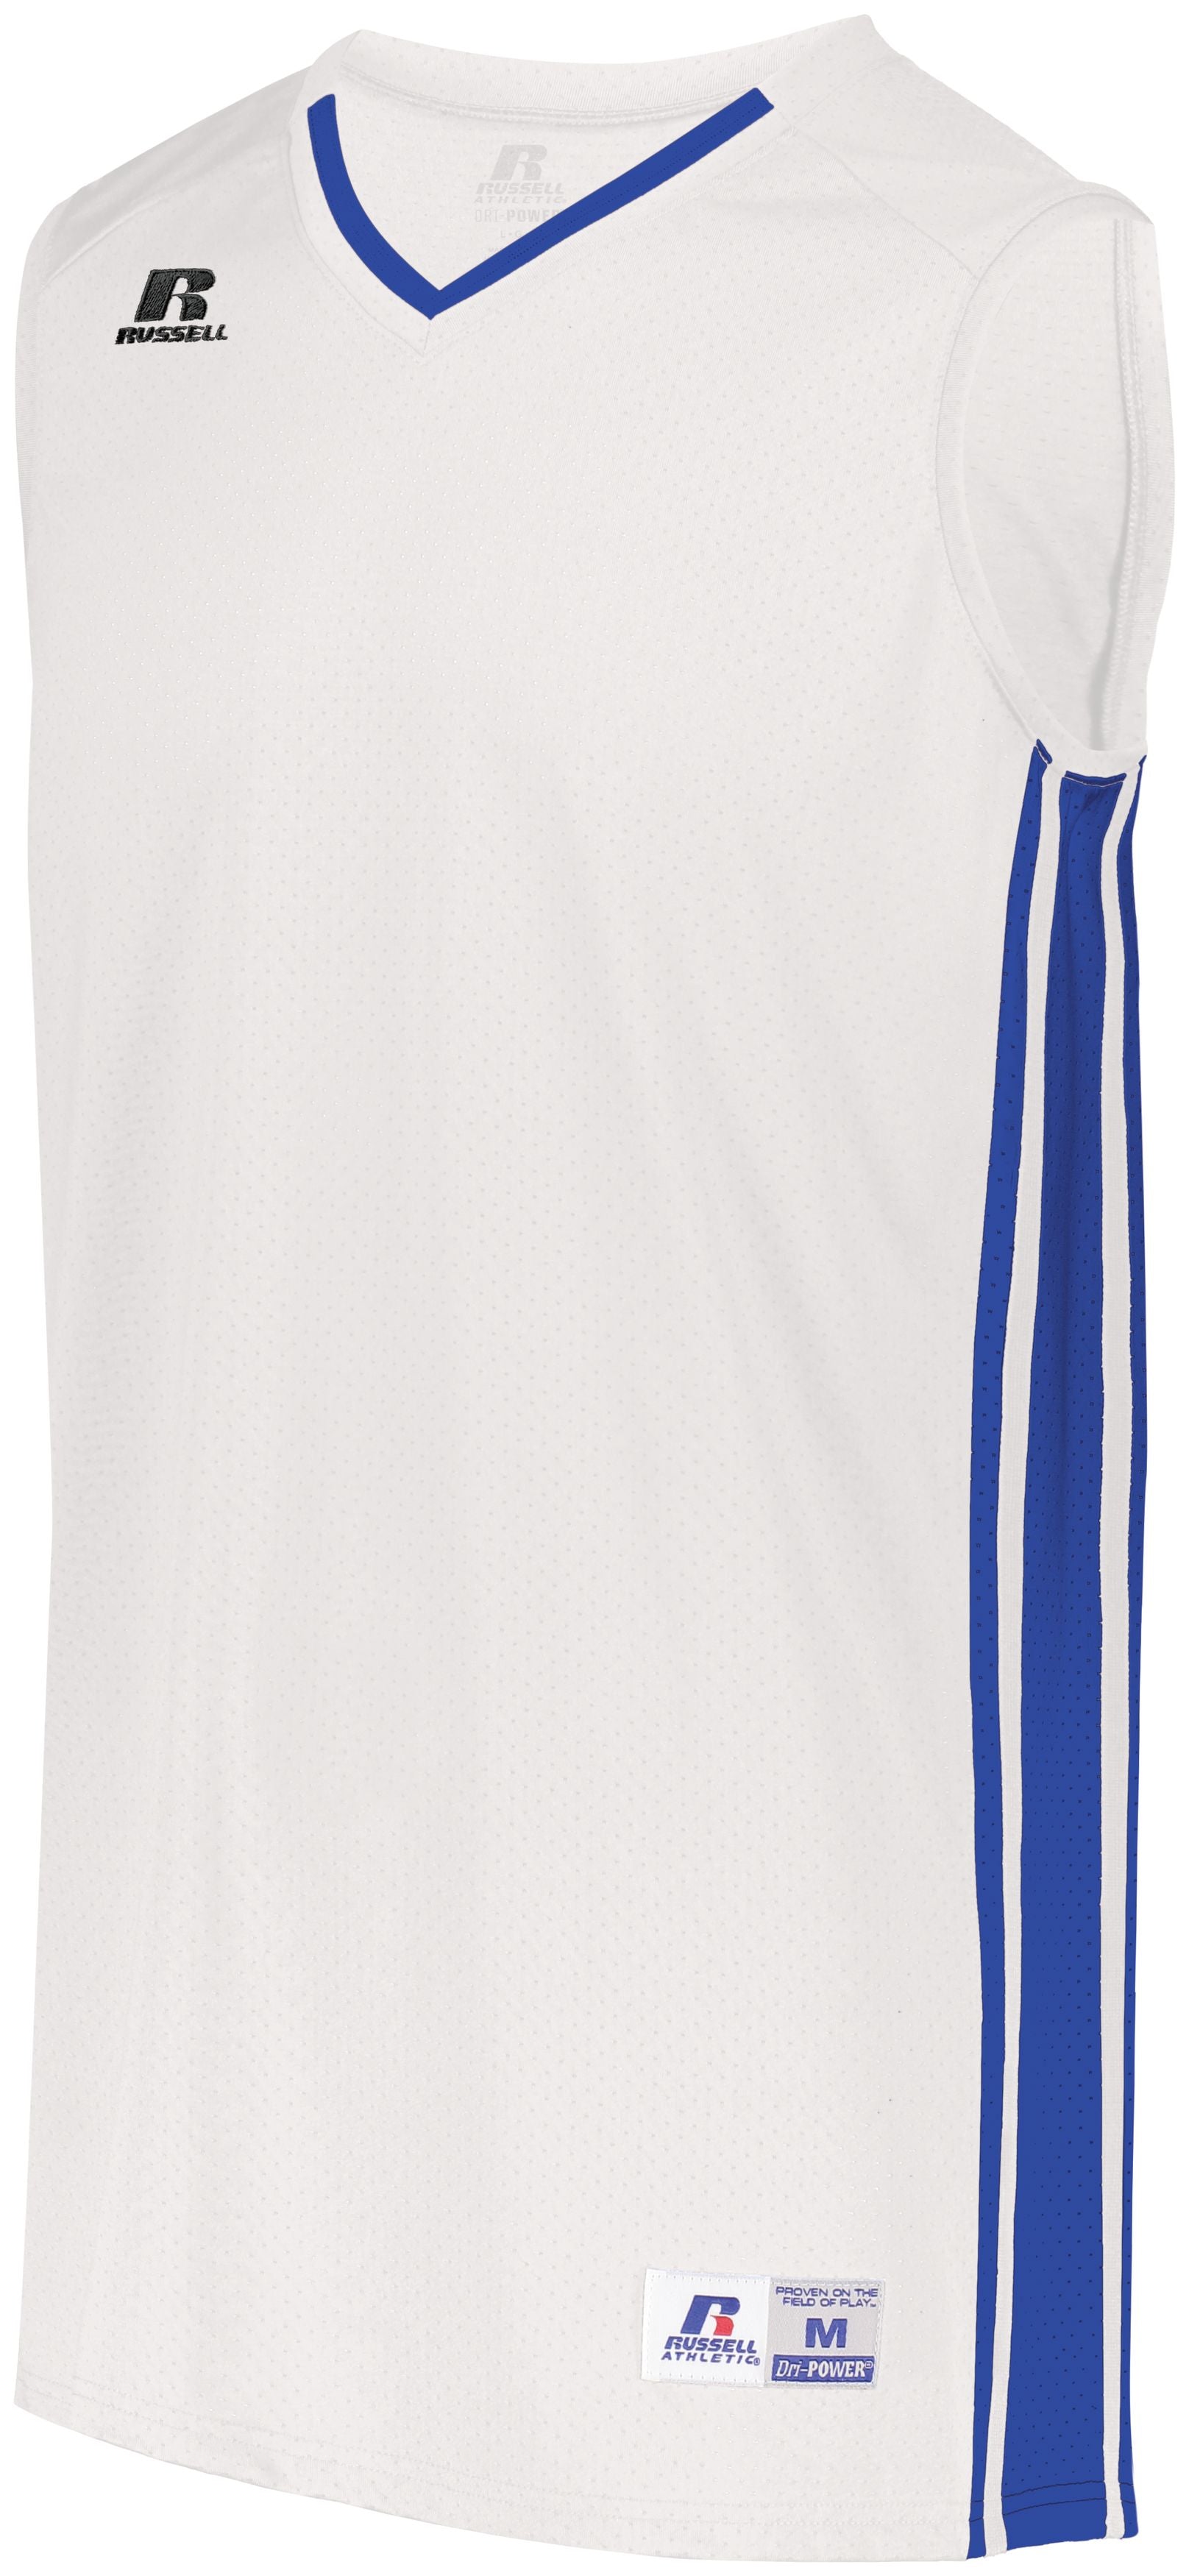 Russell Athletic Legacy Basketball Jersey in White/Royal  -Part of the Adult, Adult-Jersey, Basketball, Russell-Athletic-Products, Shirts, All-Sports, All-Sports-1 product lines at KanaleyCreations.com